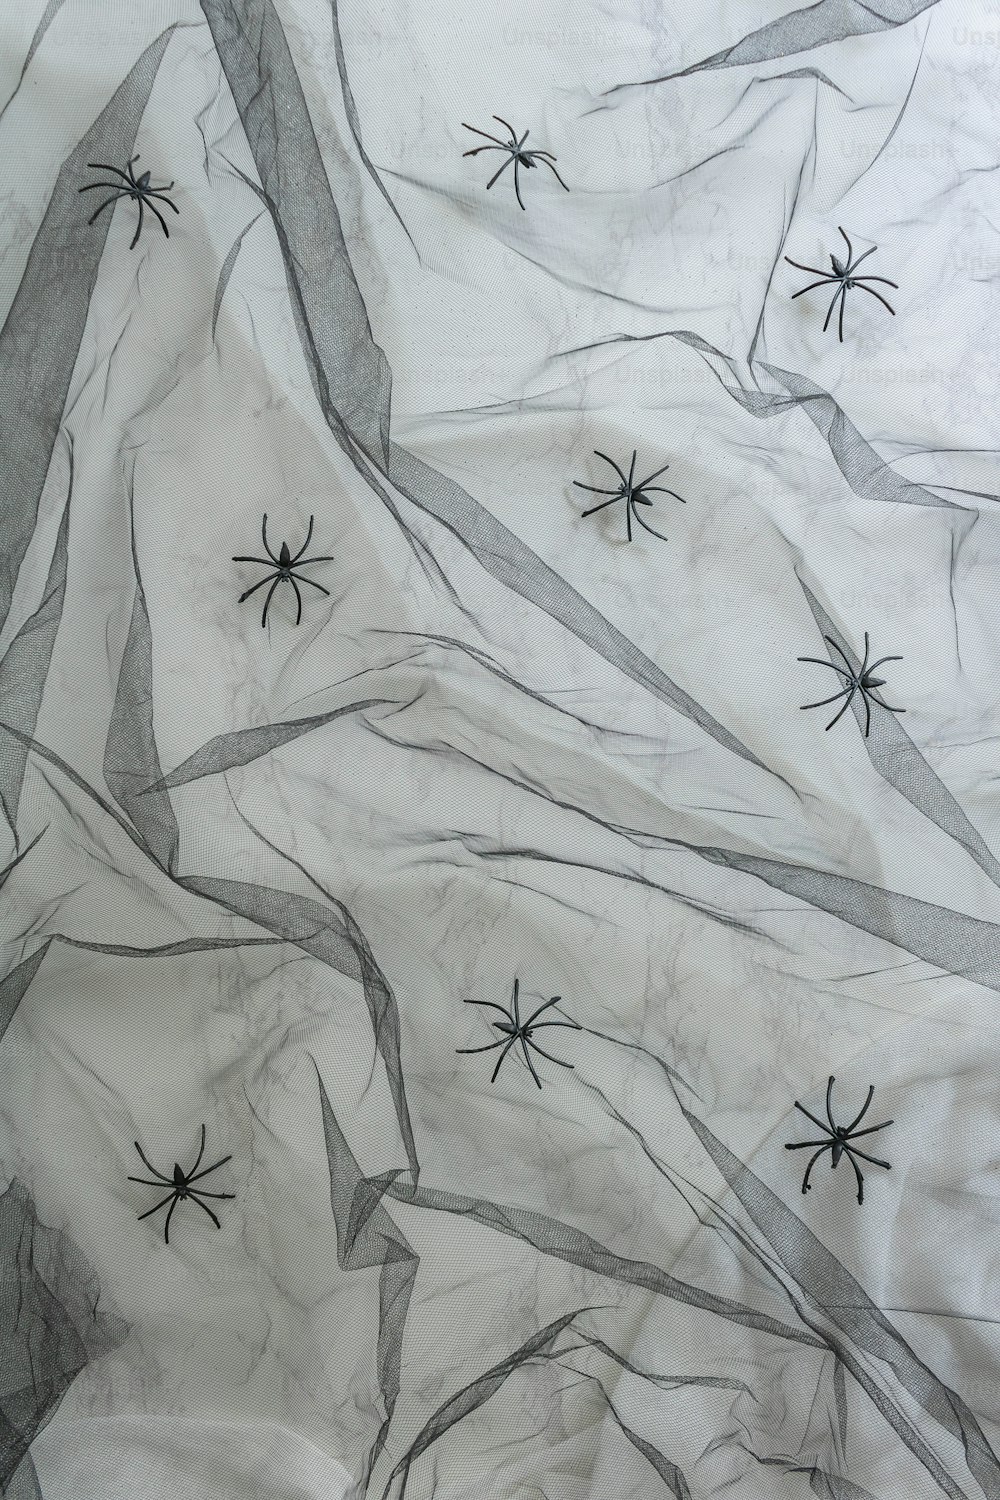 a black and white drawing of spider webs